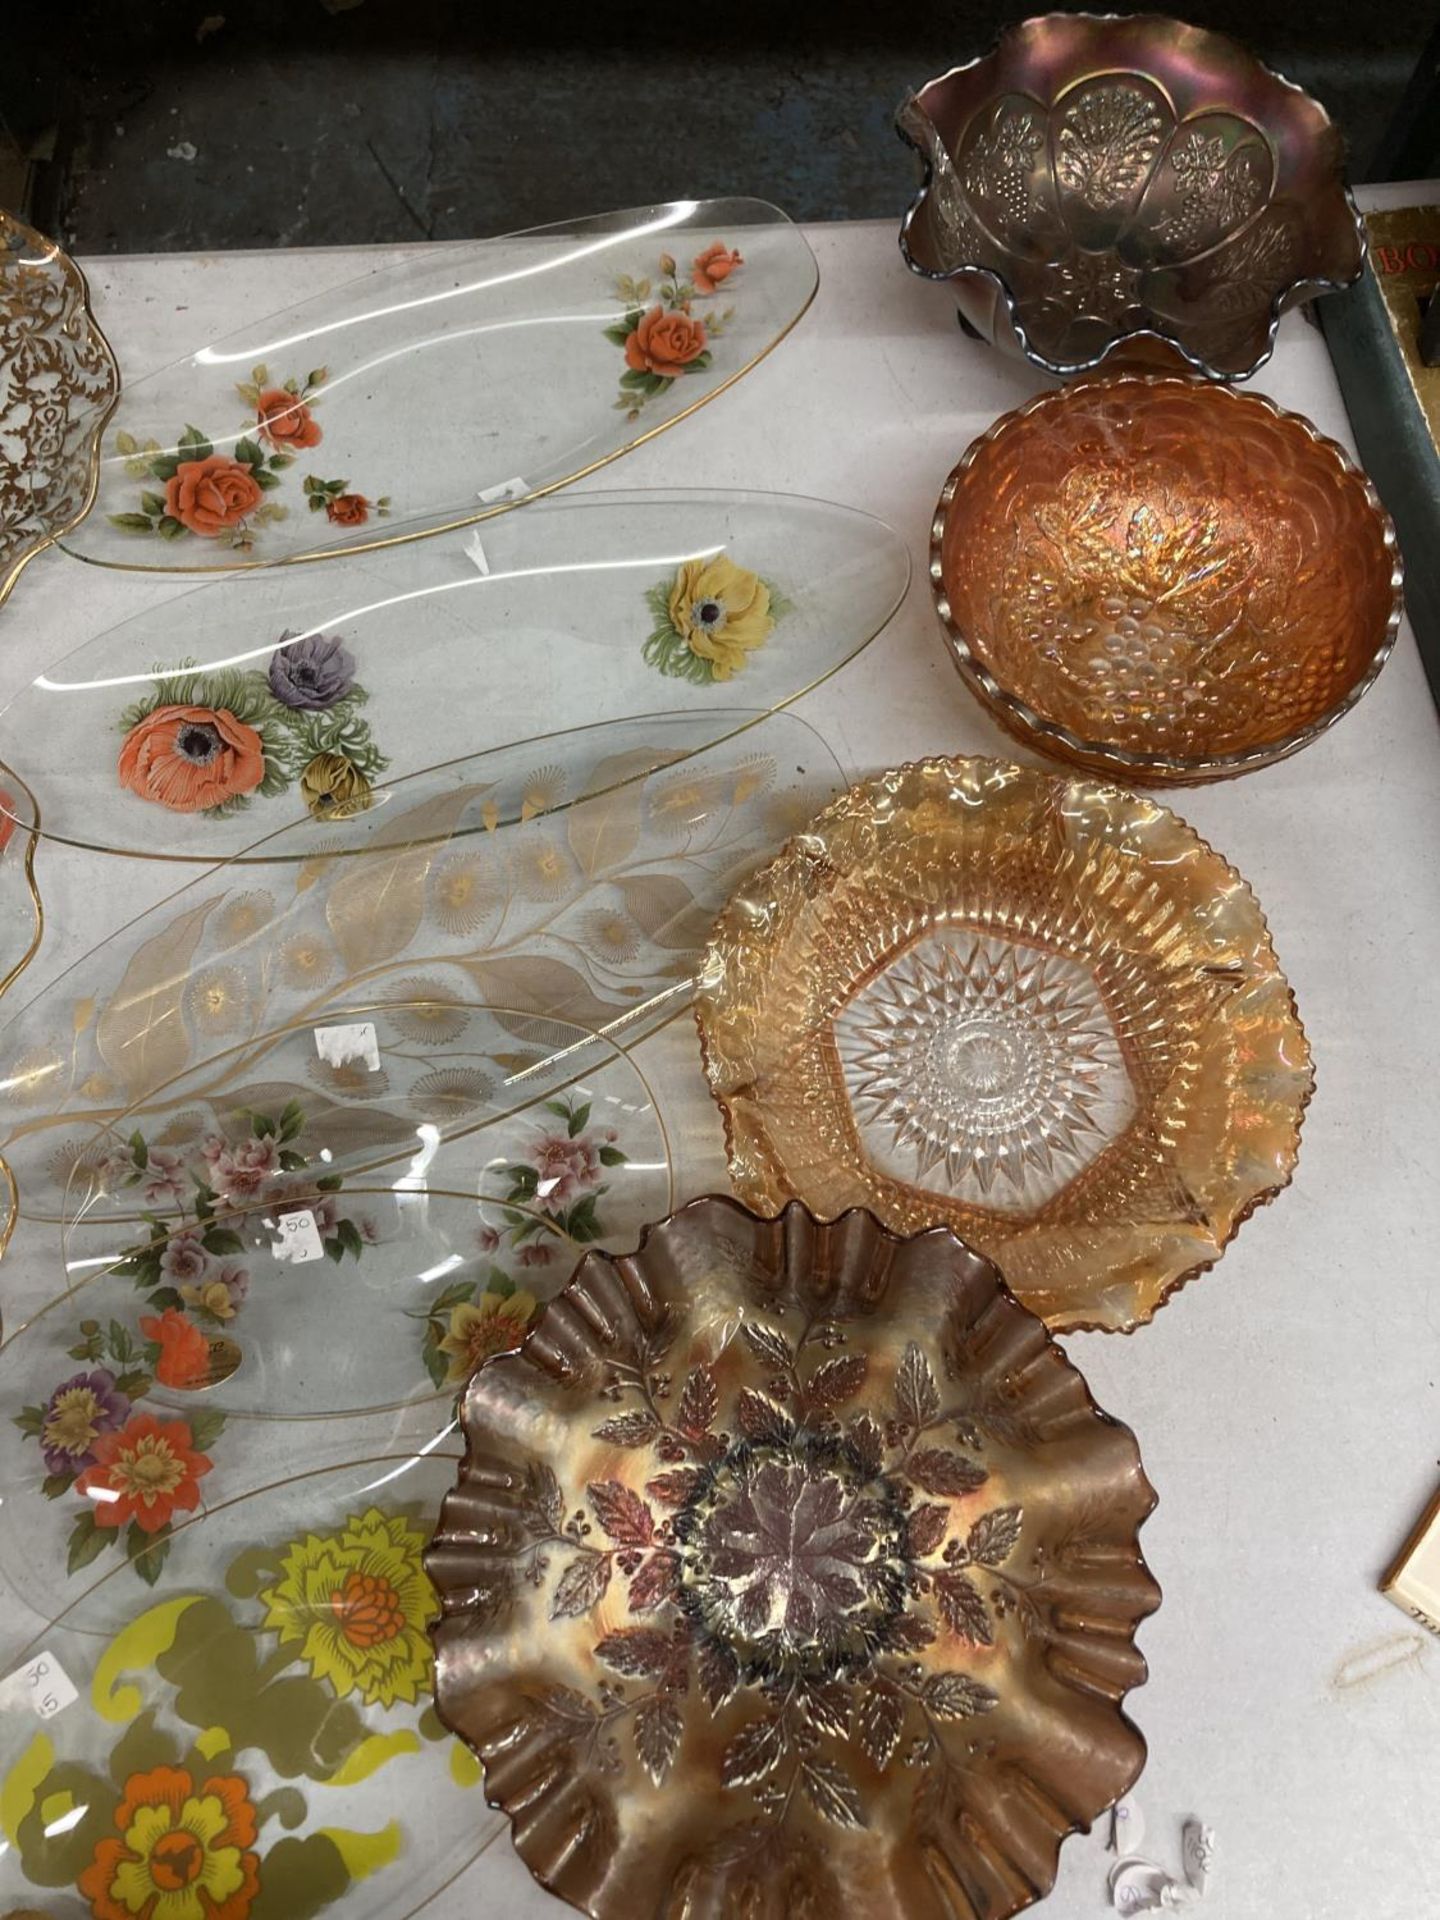 A QUANTITY OF GLASSWARE TO INCLUDE FLORAL PRINTED SERVING PLATES AND CARNIVAL GLASS BOWLS - Image 2 of 6